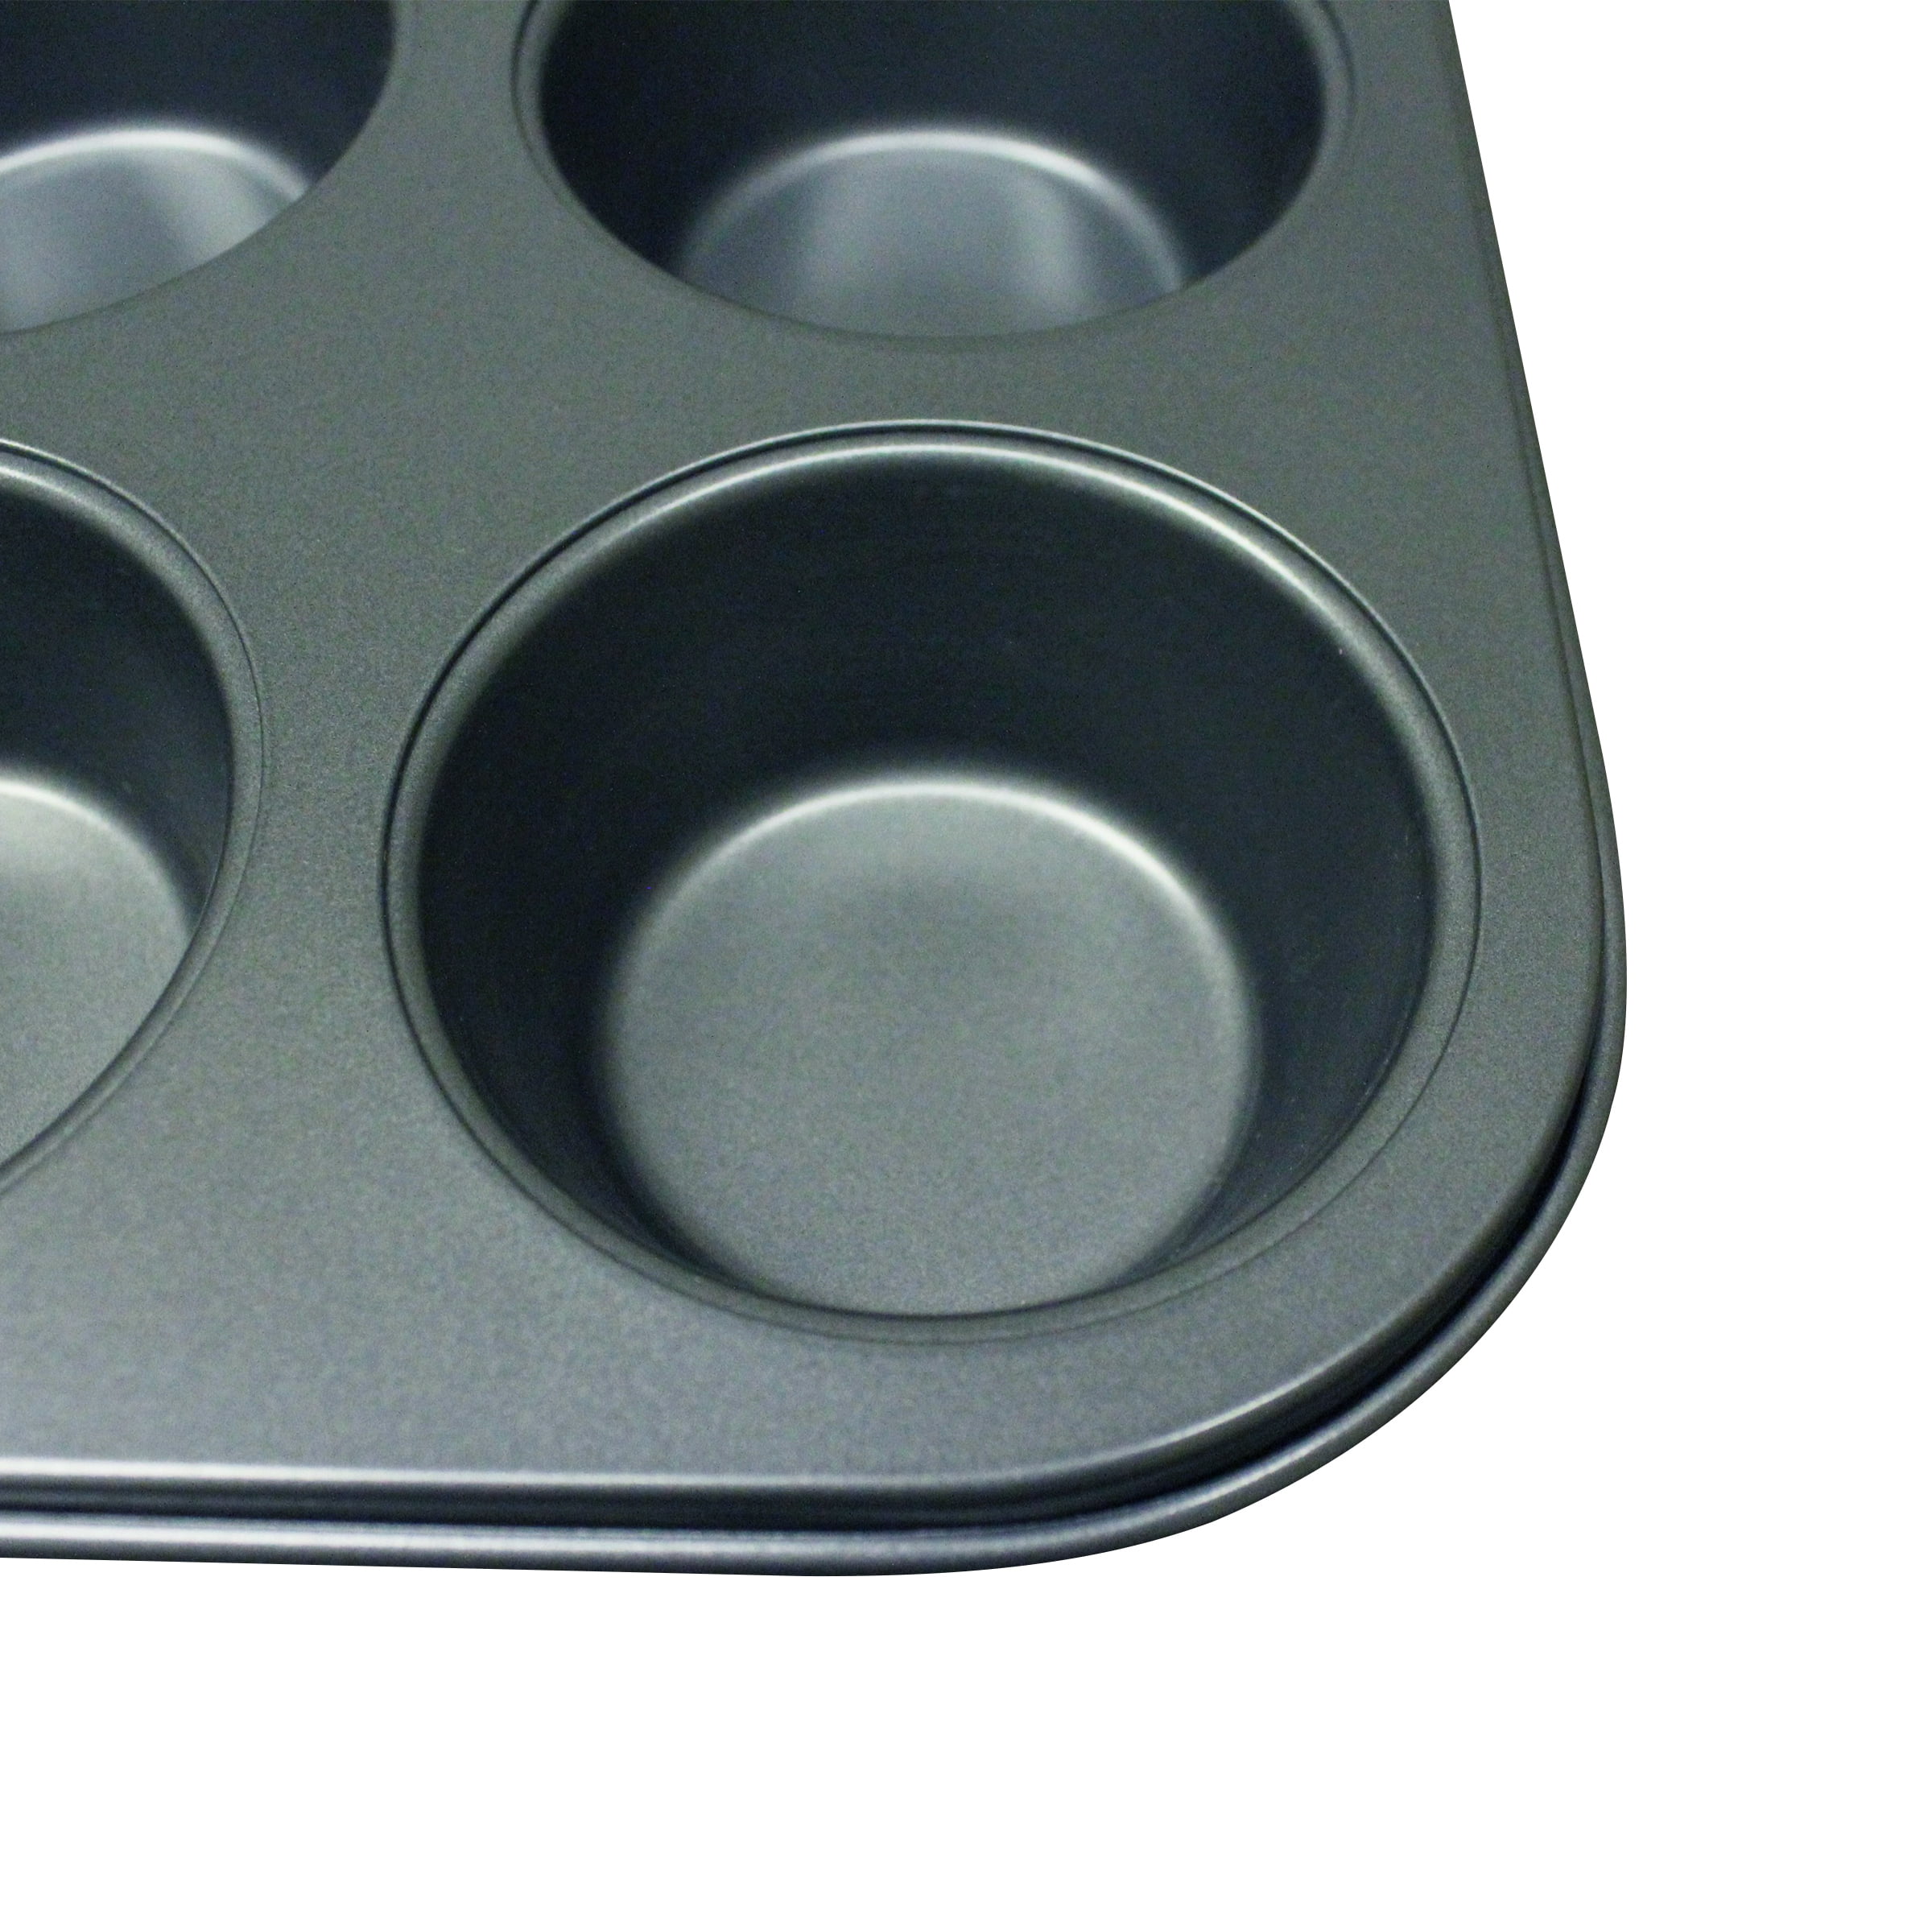 24-Cup Muffin Pan/Cupcake Pan by Tezzorio, 15 x 10-Inch Nonstick Carbon